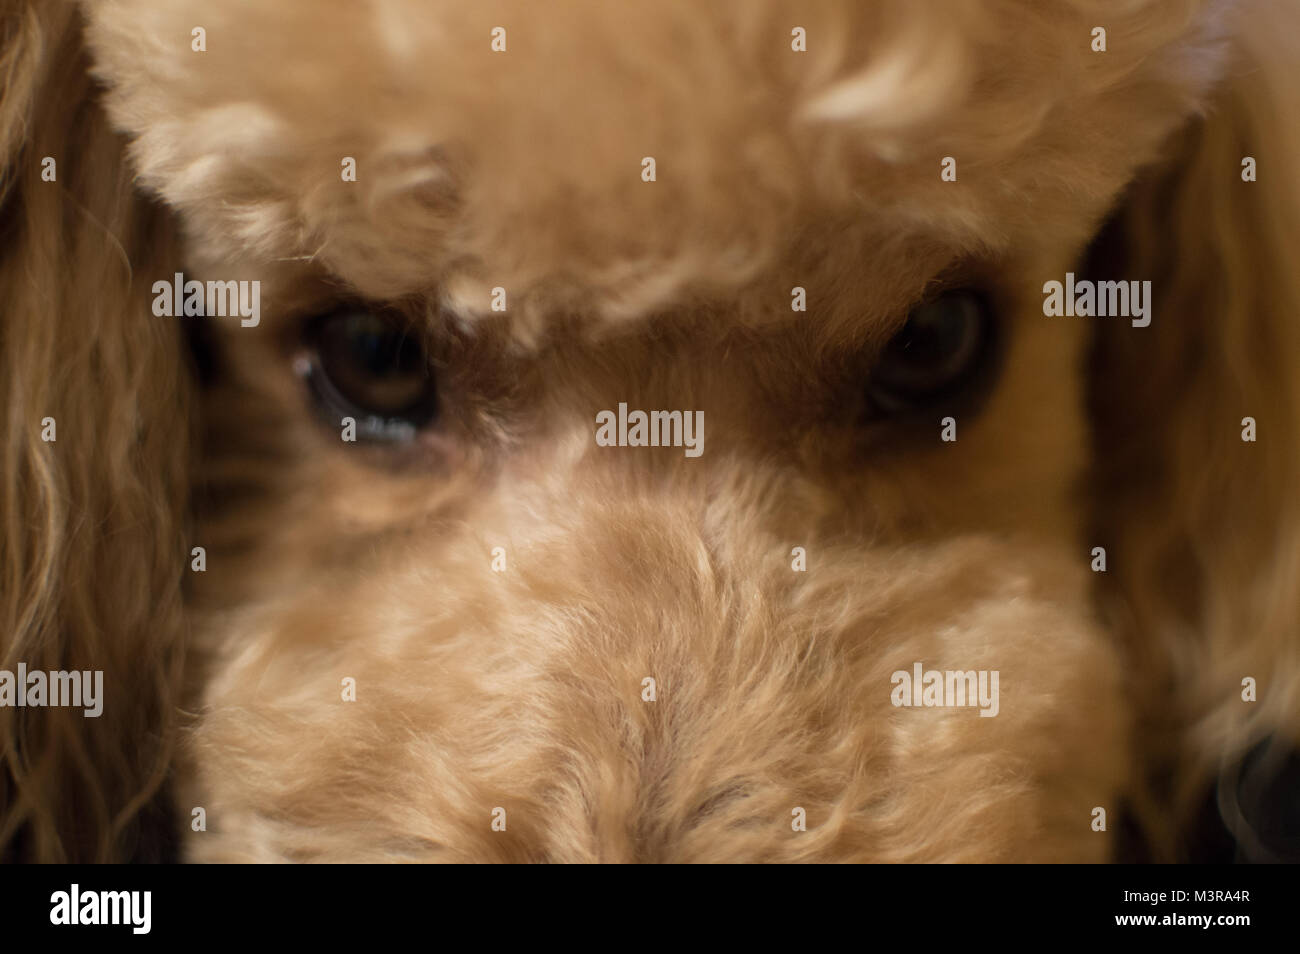 Face of poodle Stock Photo